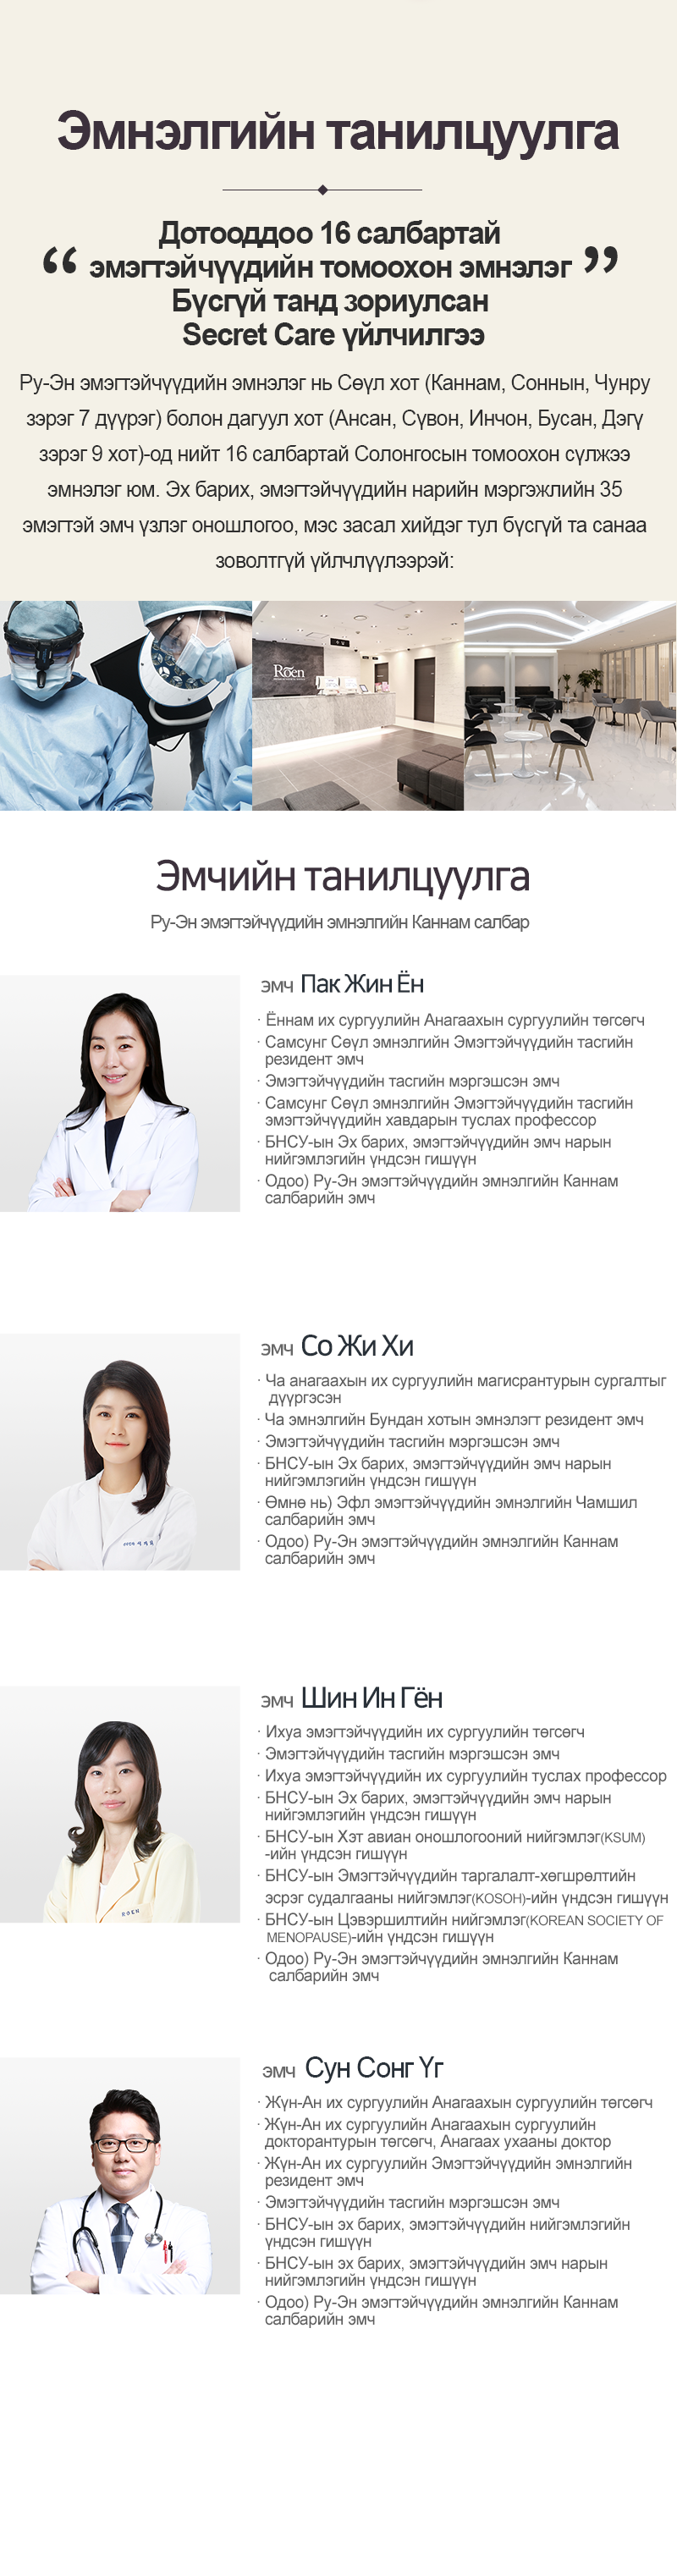 About the Clinic